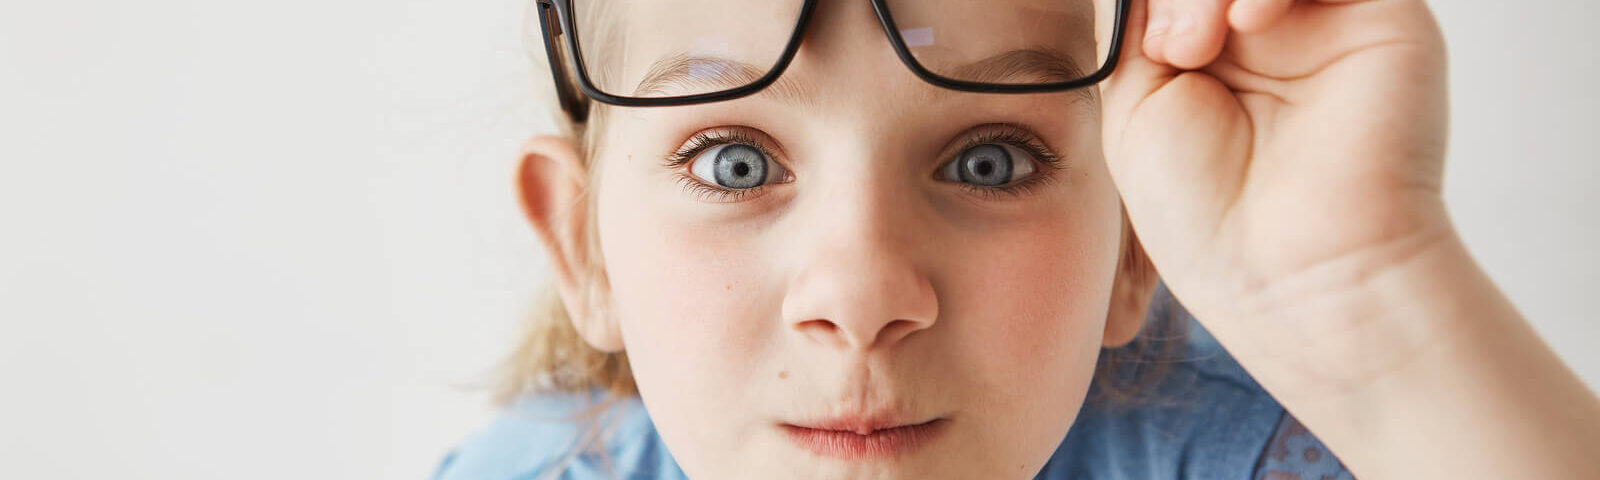 Common causes of cataracts among children and adults